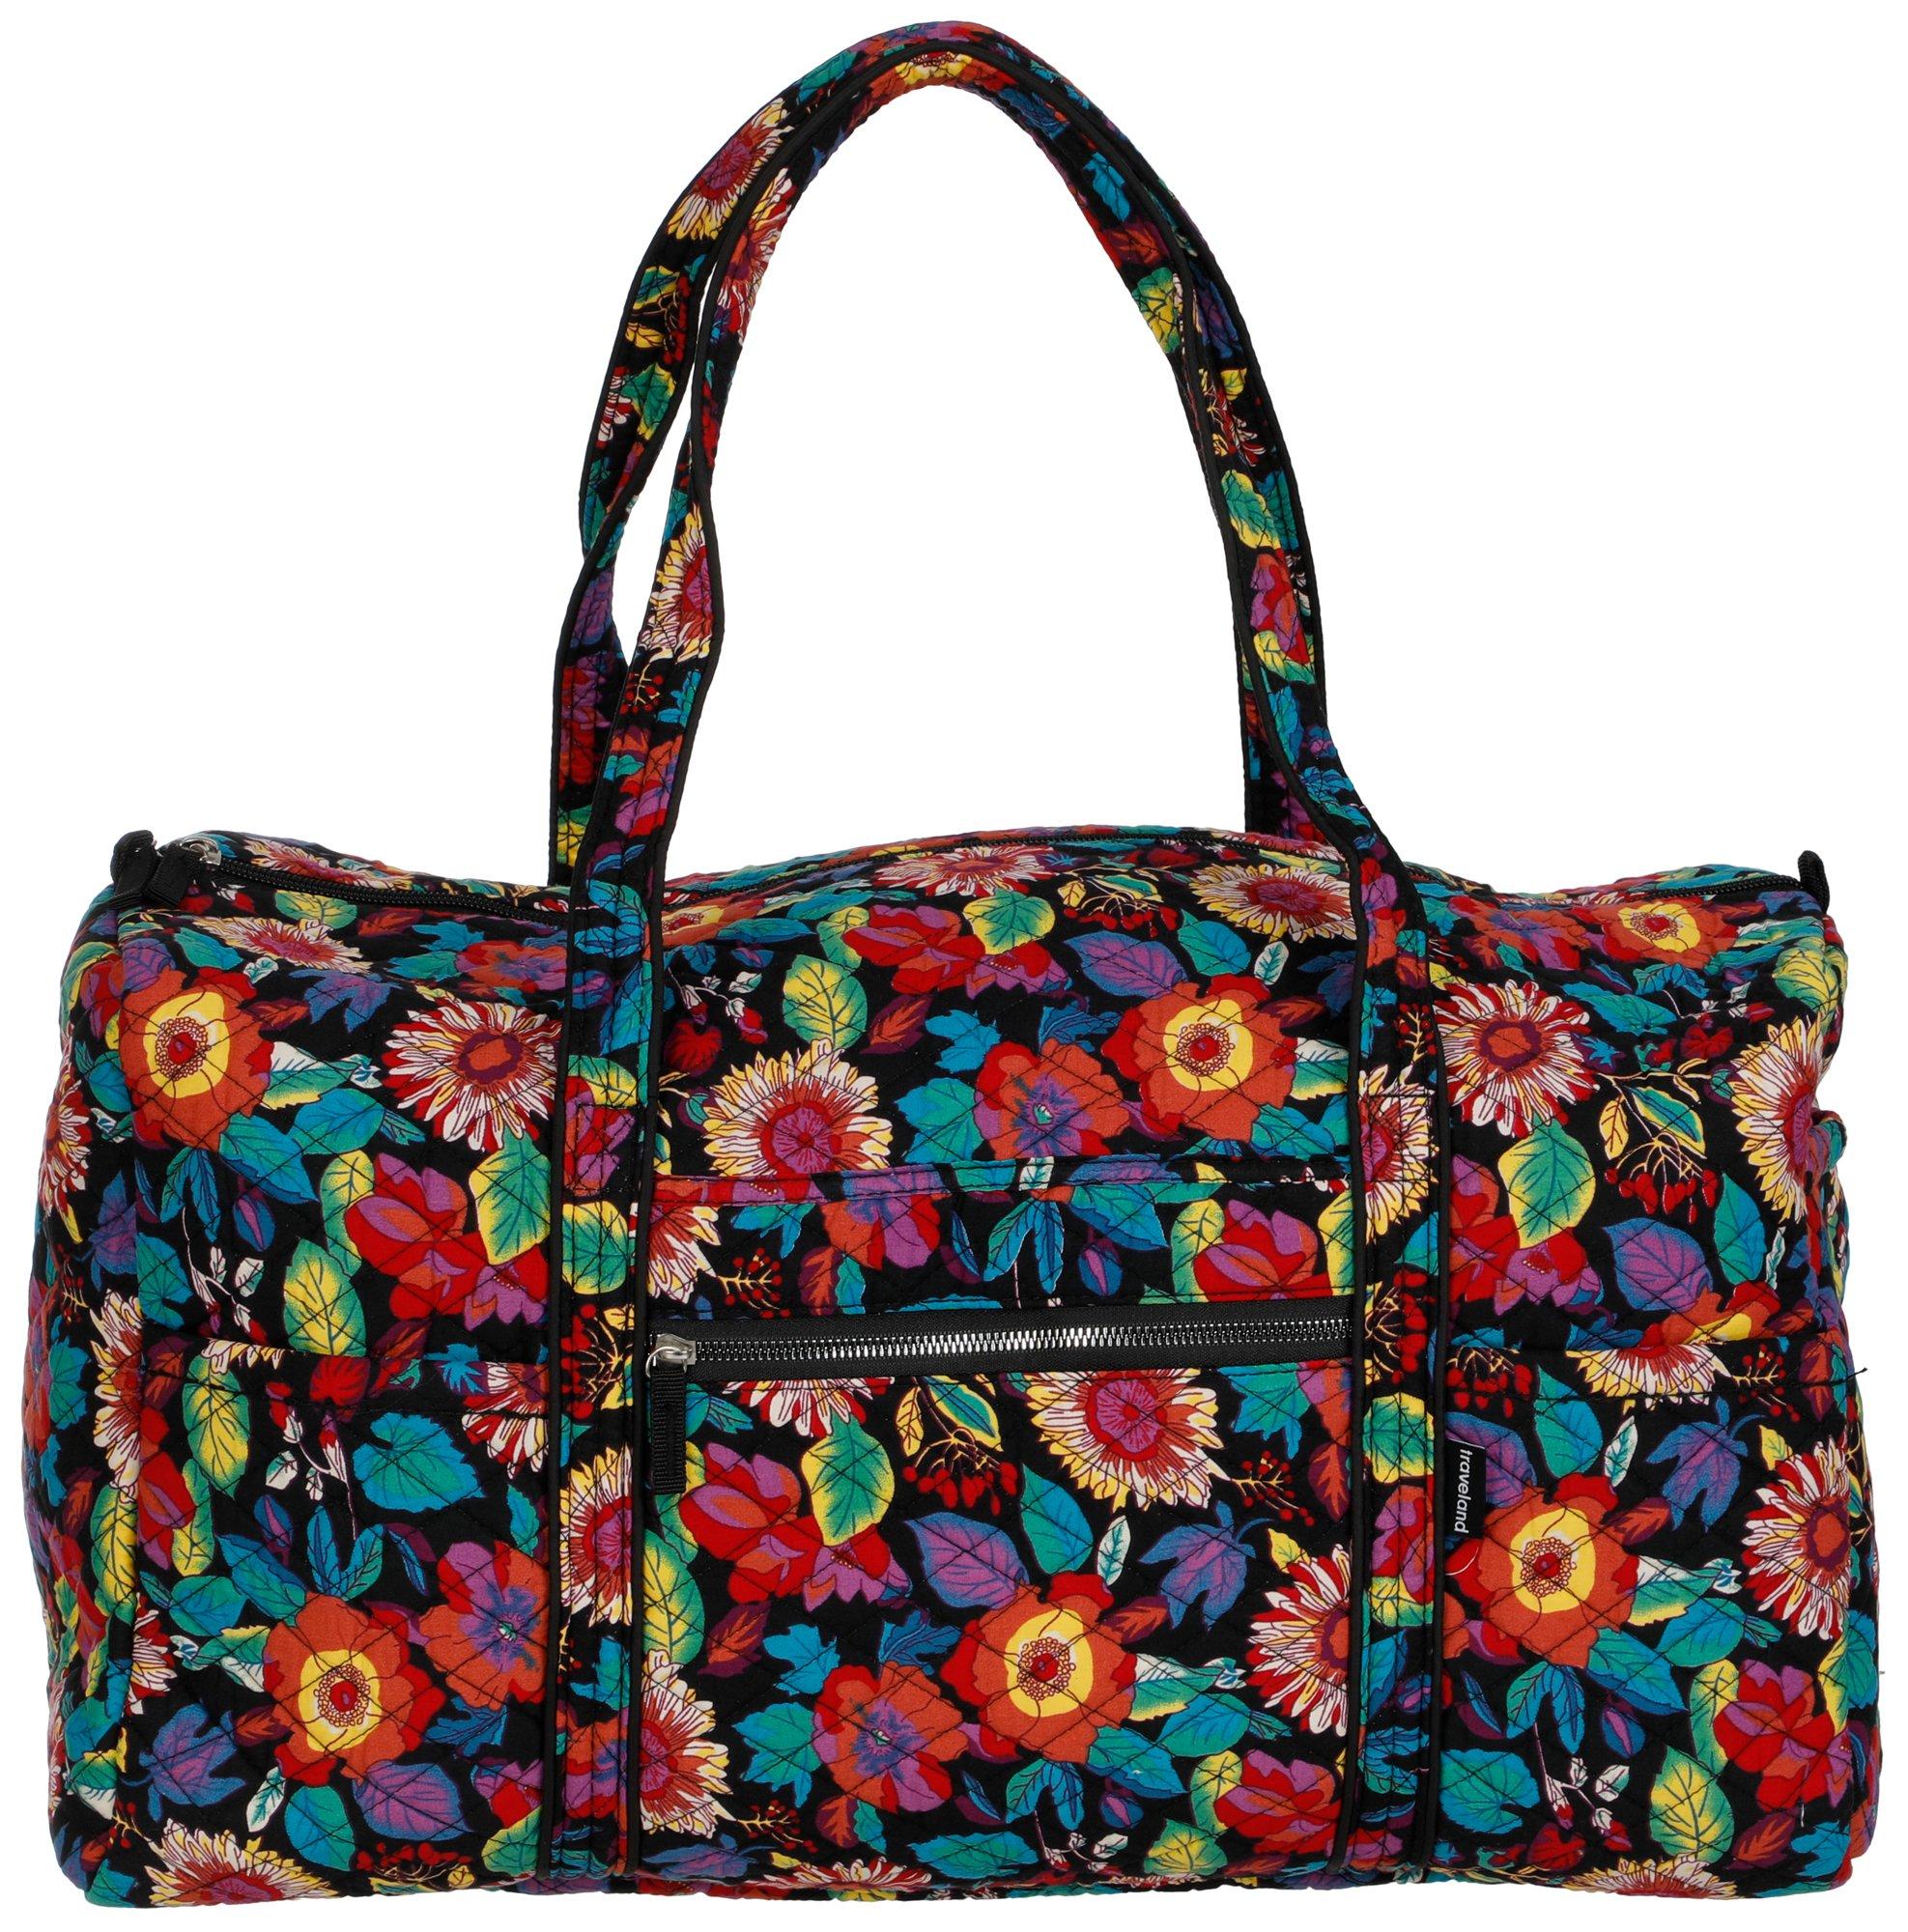 Quilted Floral Travel Duffle - Black Multi